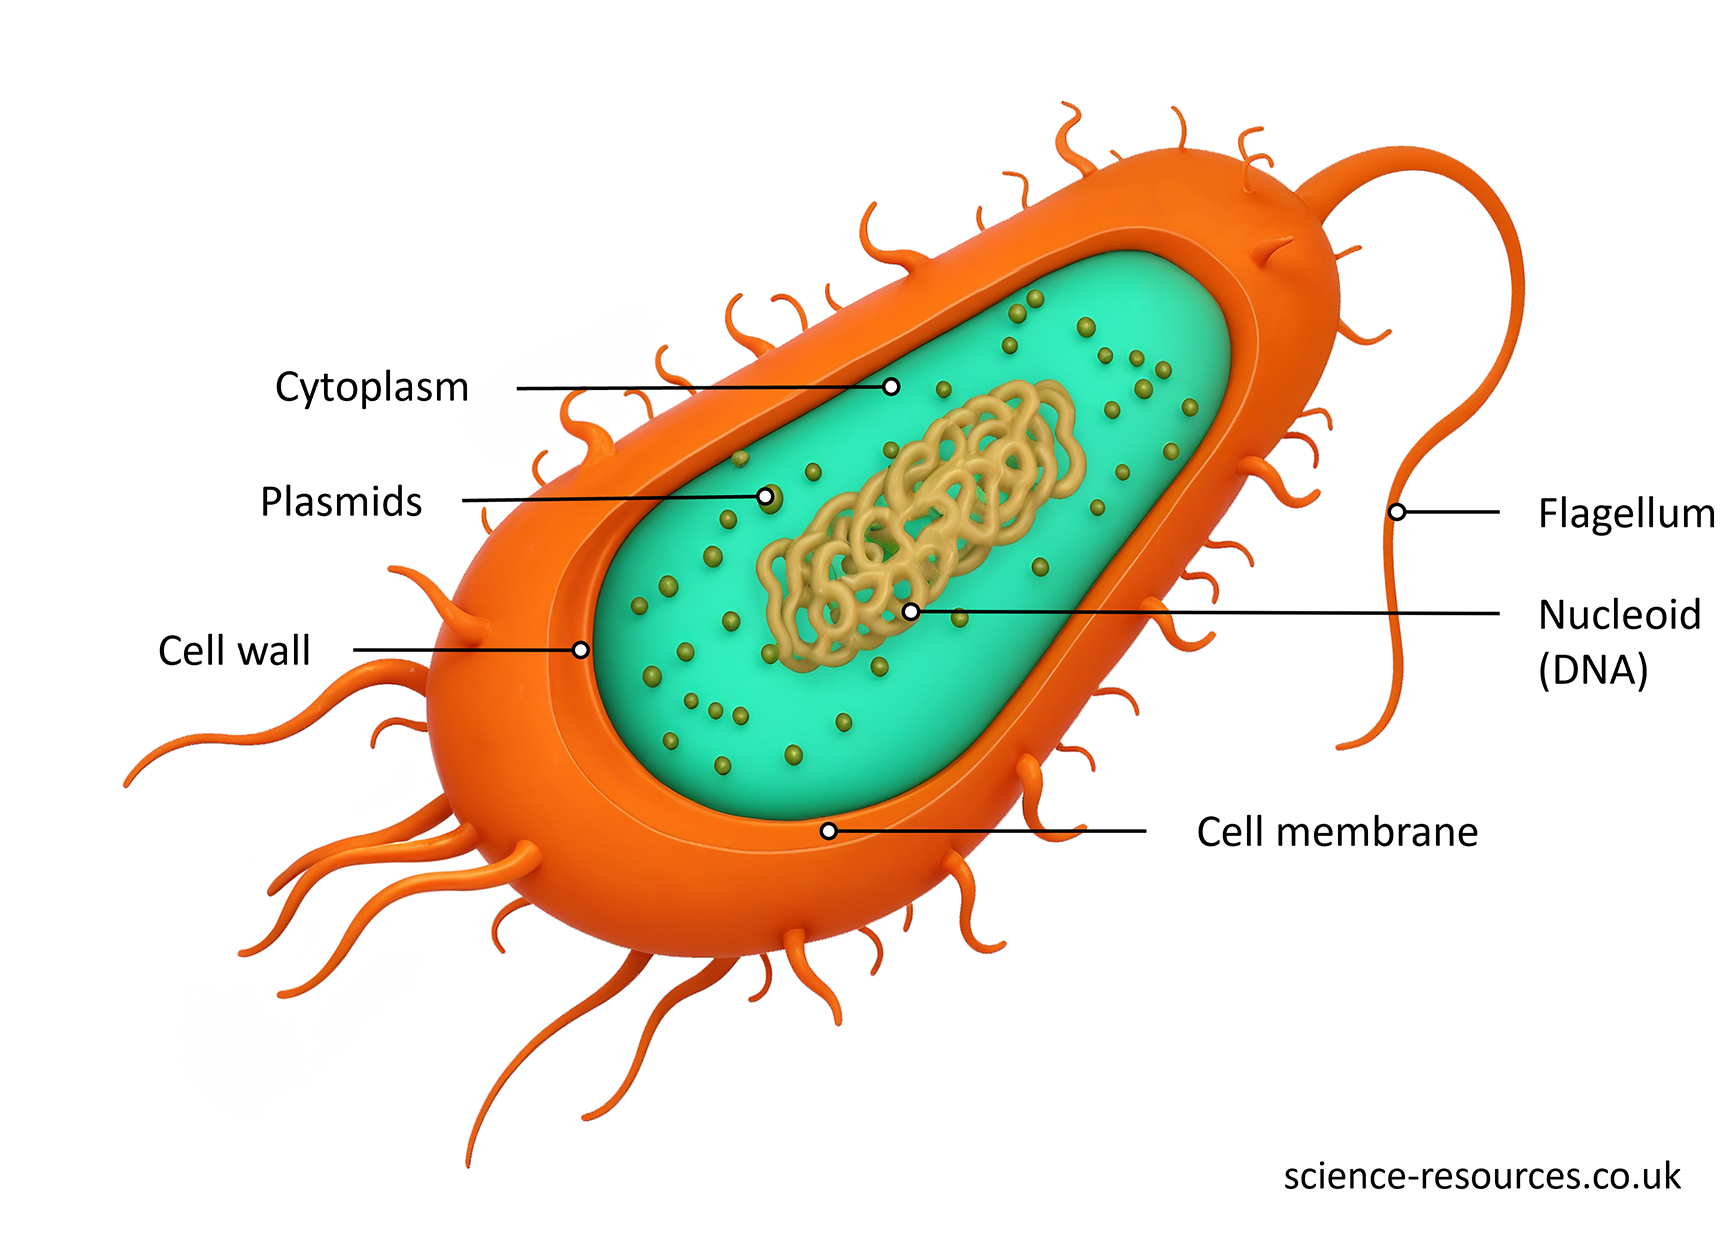 This image is a detailed illustration of a bacterial cell, highlighting its various components and structures. Each part is labeled.